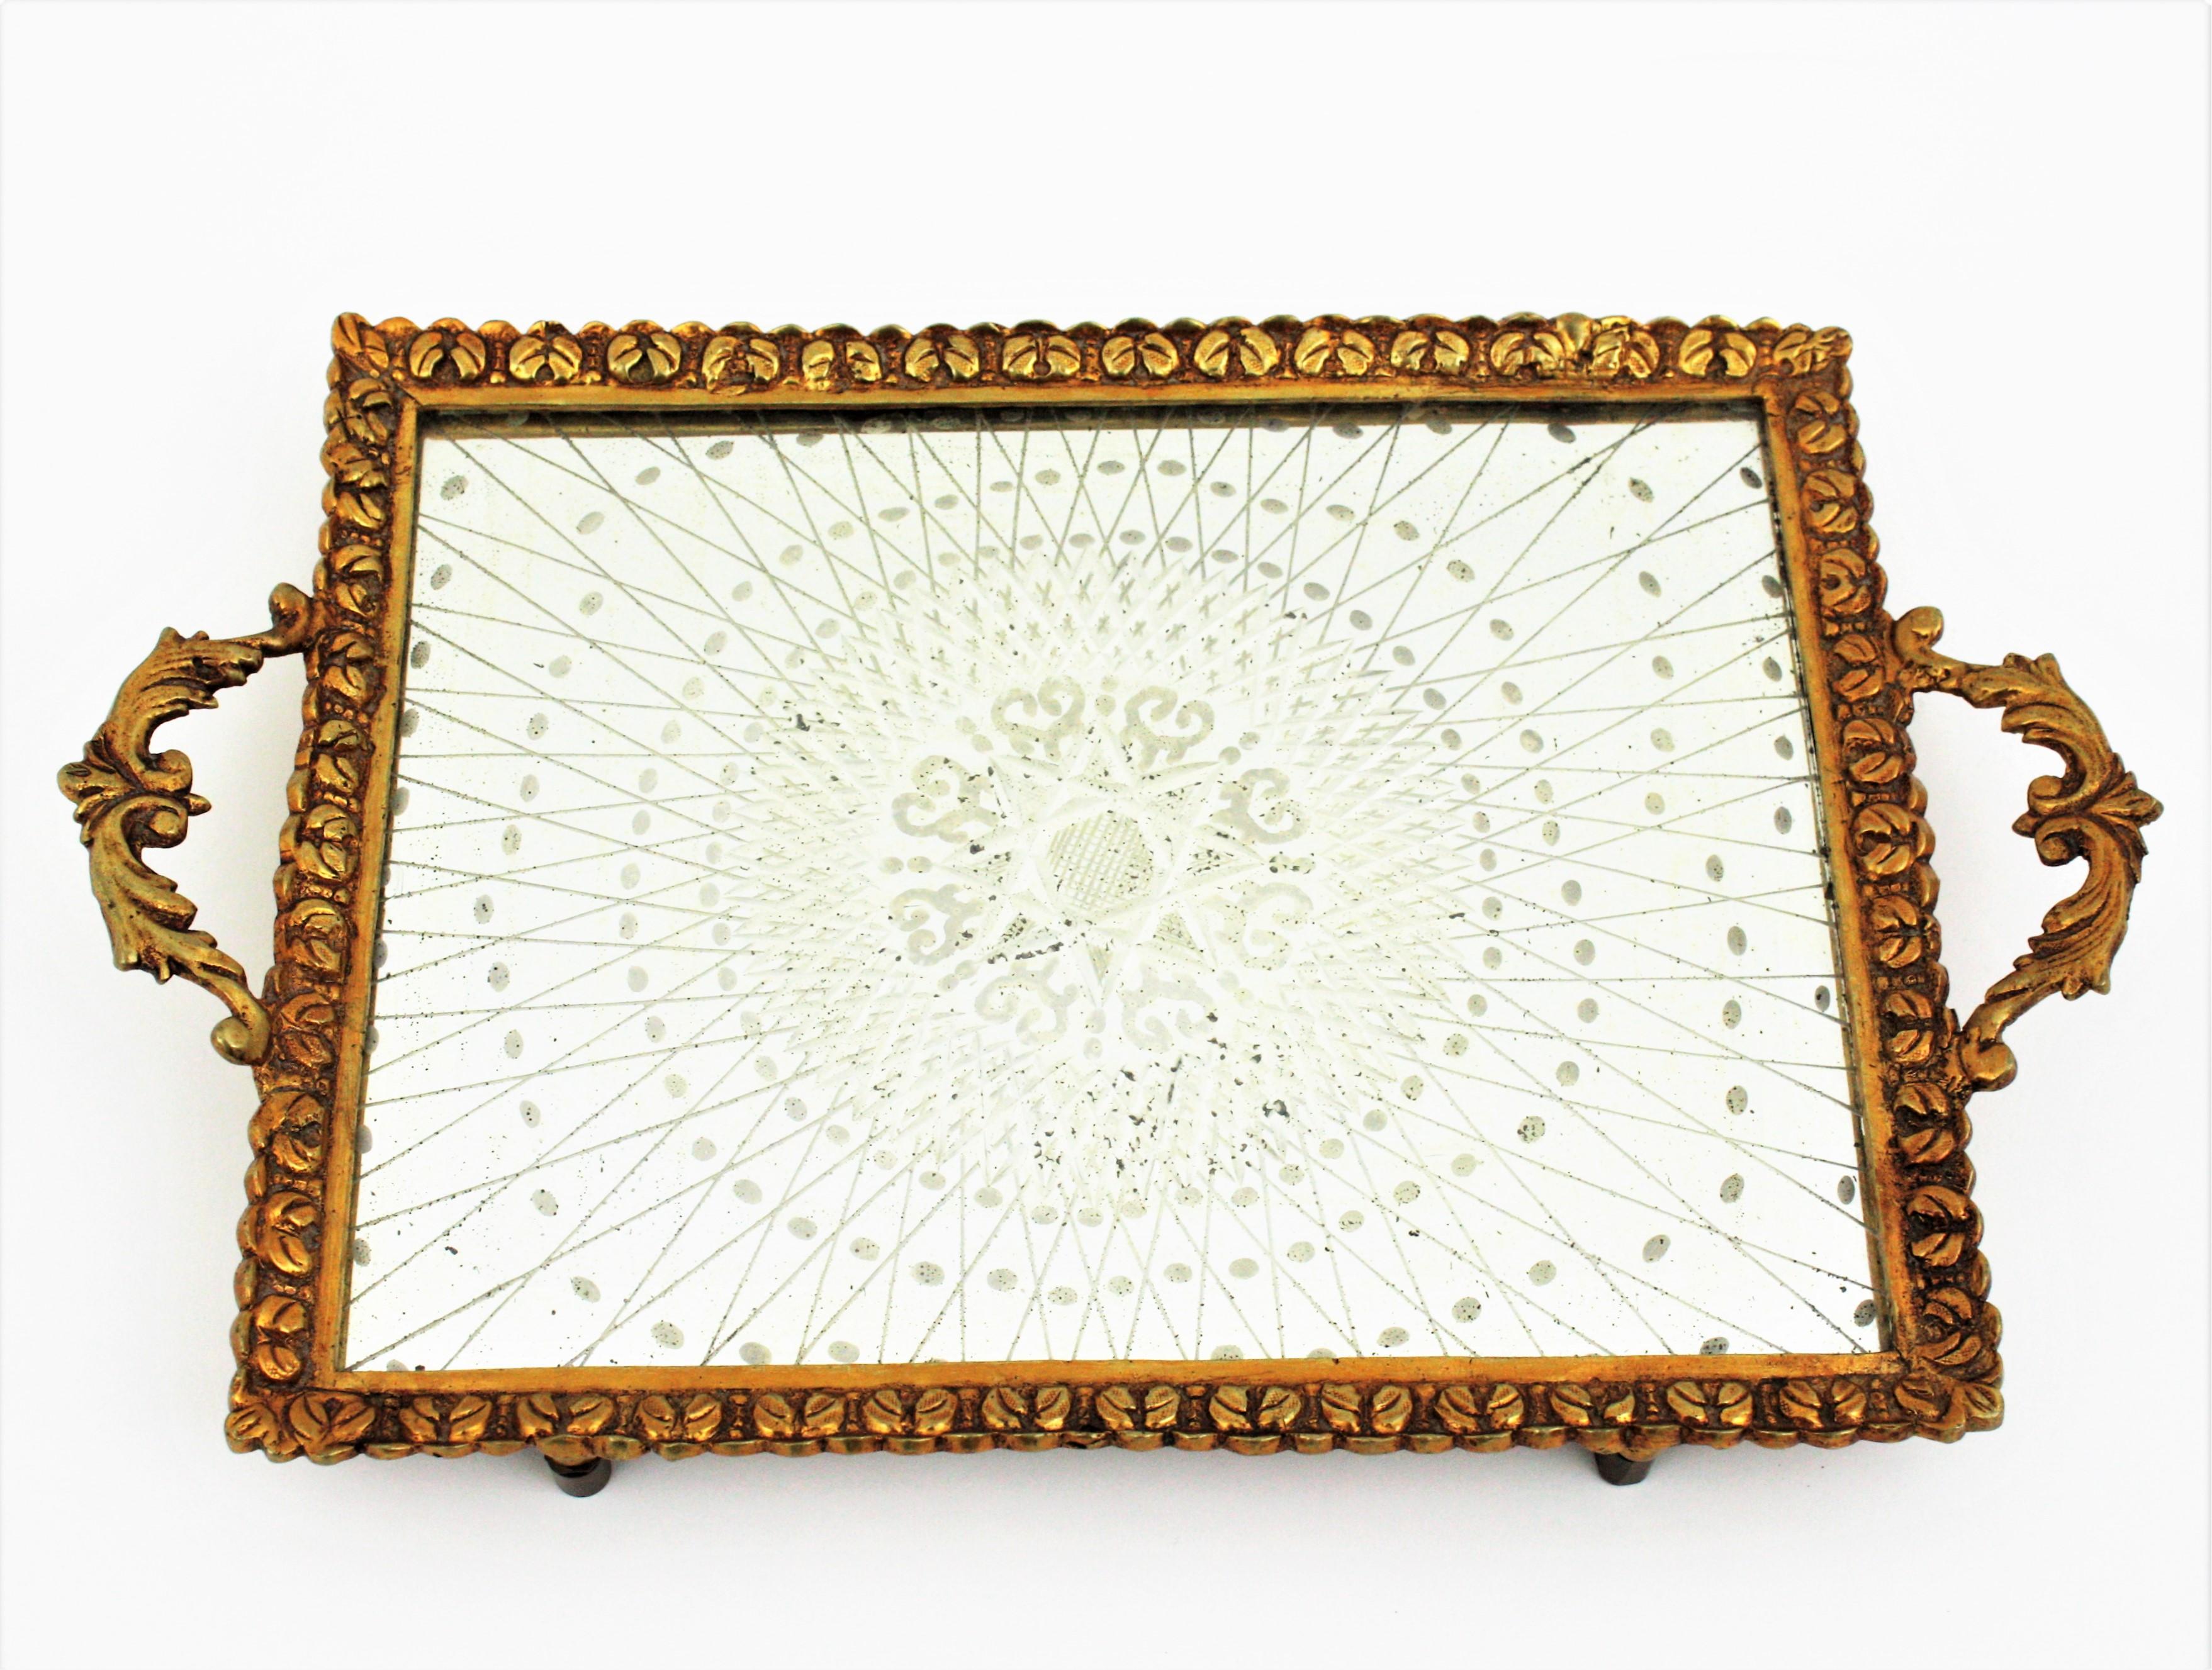 Amazing early 20th century Rectangular Art Deco carved bronze tray with handles and etched mirror top, France, 1930s-1940s.
This mirrored serving tray or vanity tray features a rectangular bronze frame with carving floral details thorough and